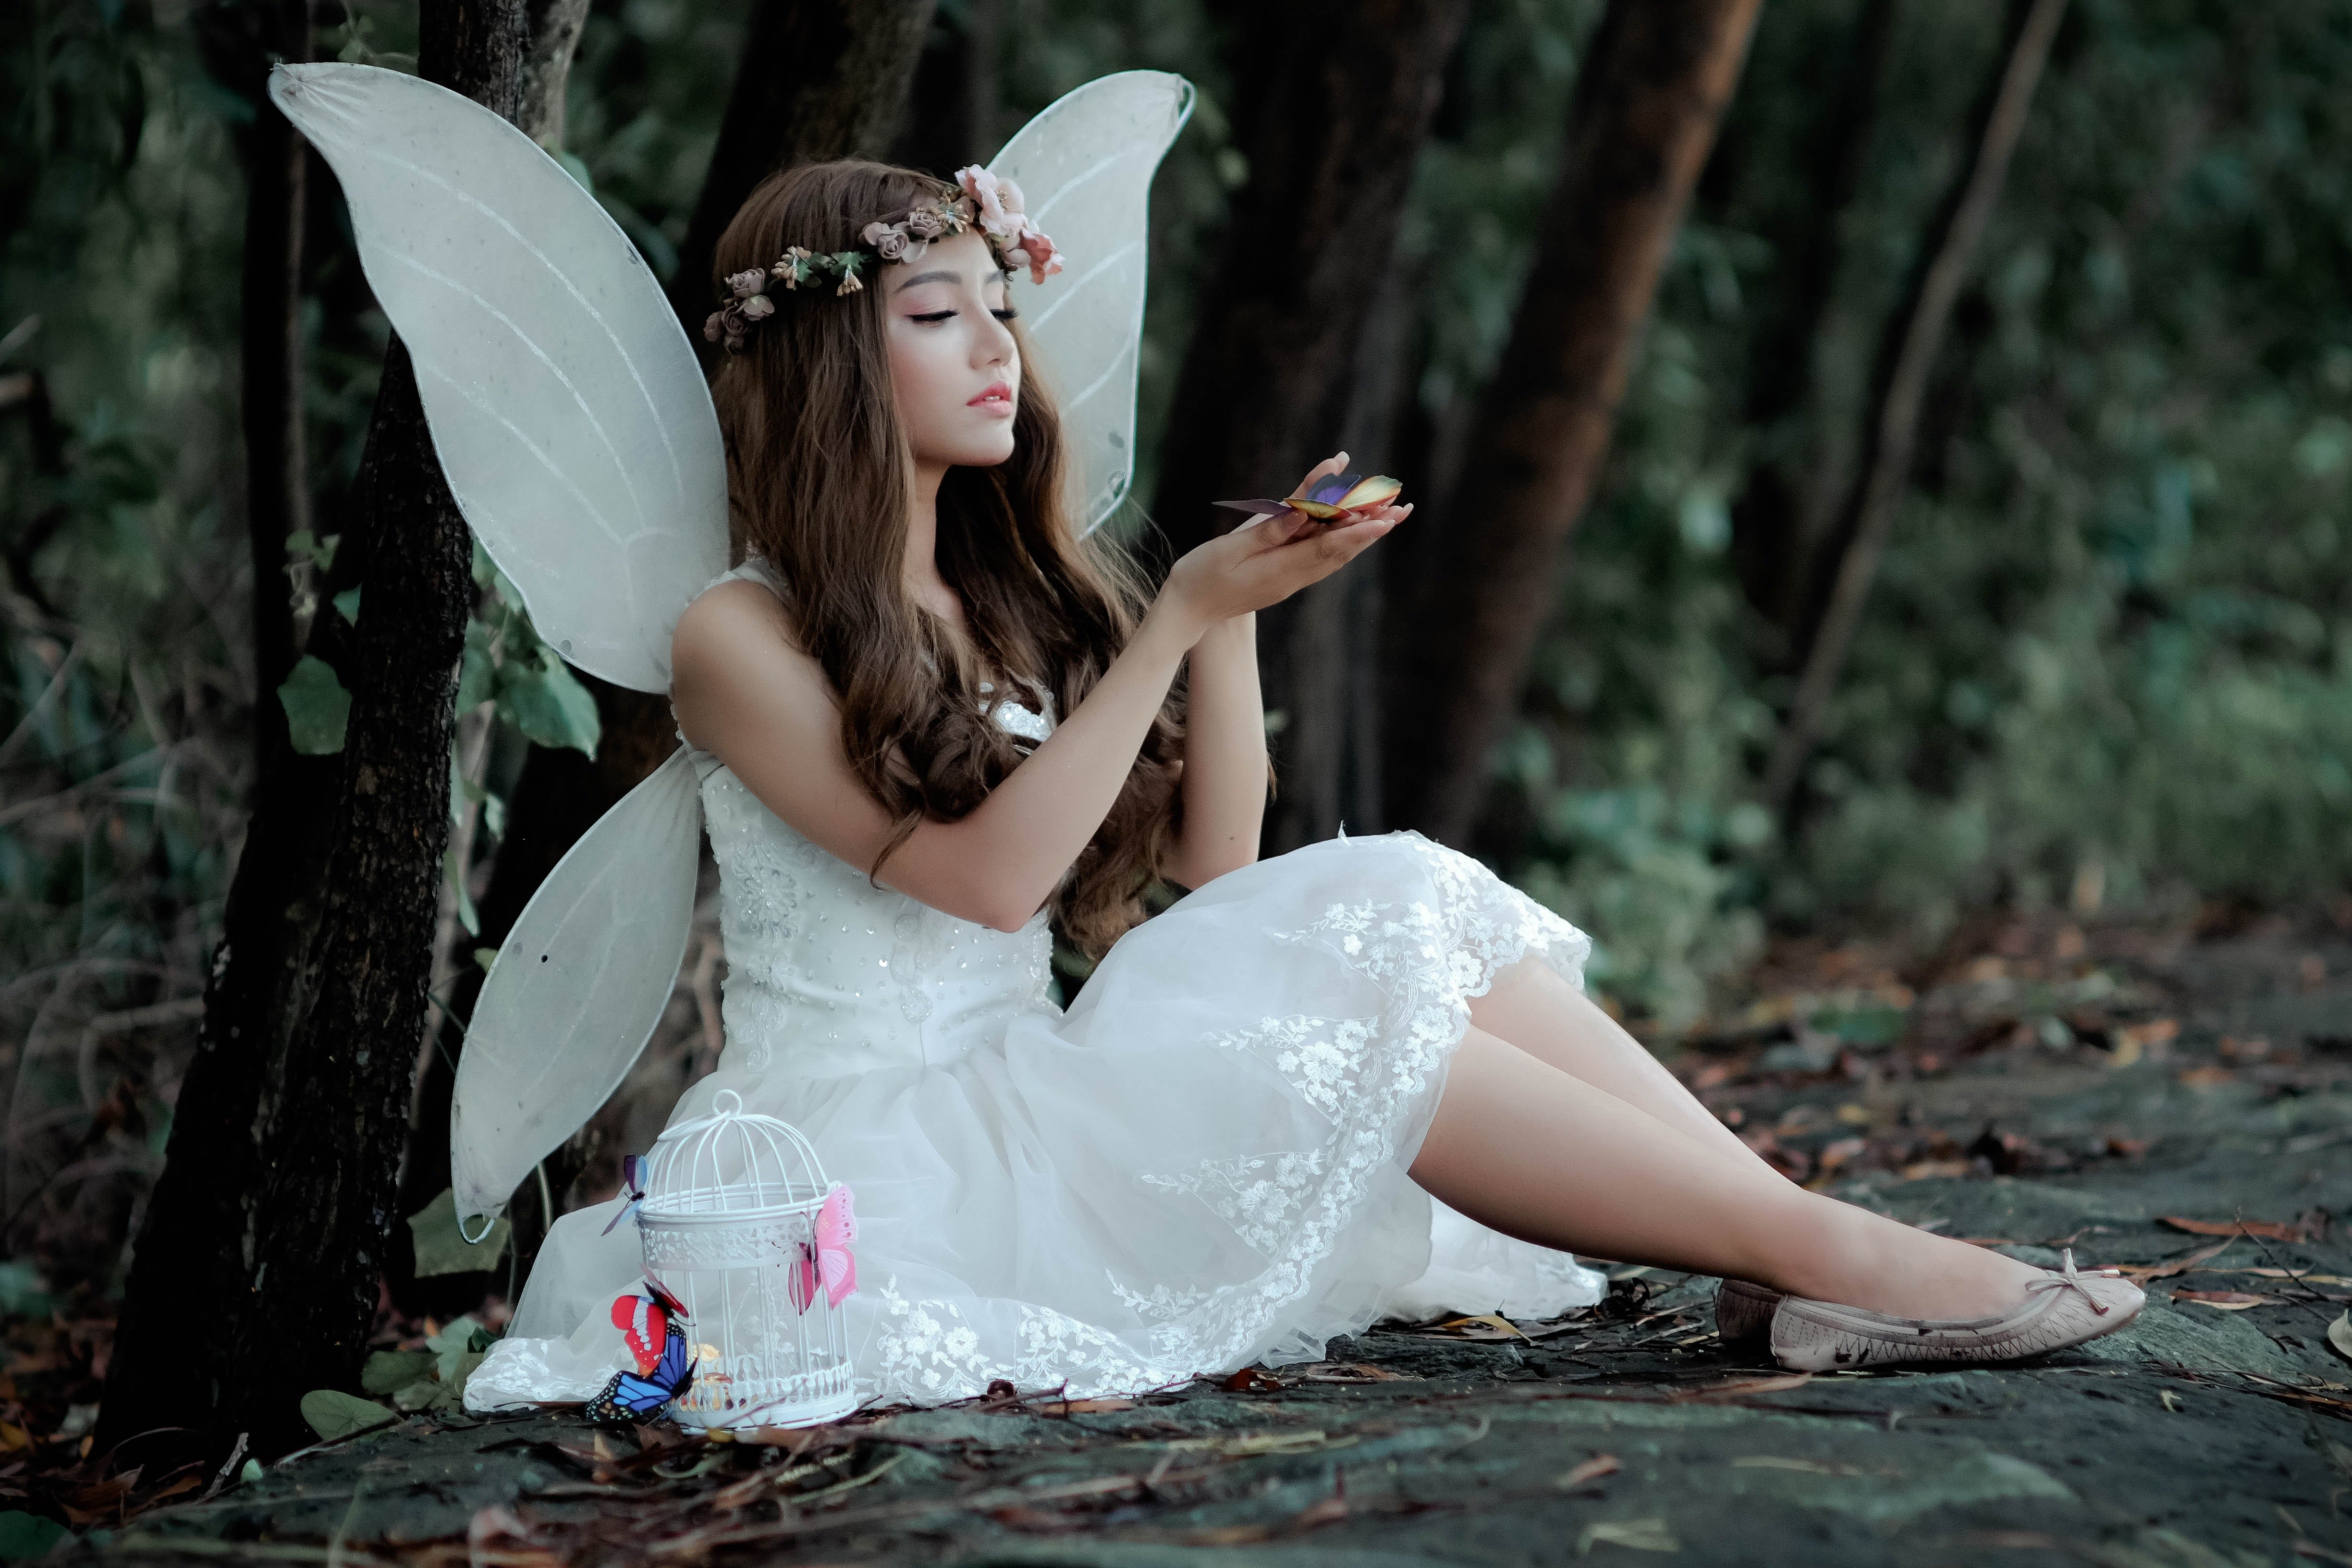 Pictured - A woman wearing a fairy costume | Source: Pexels 